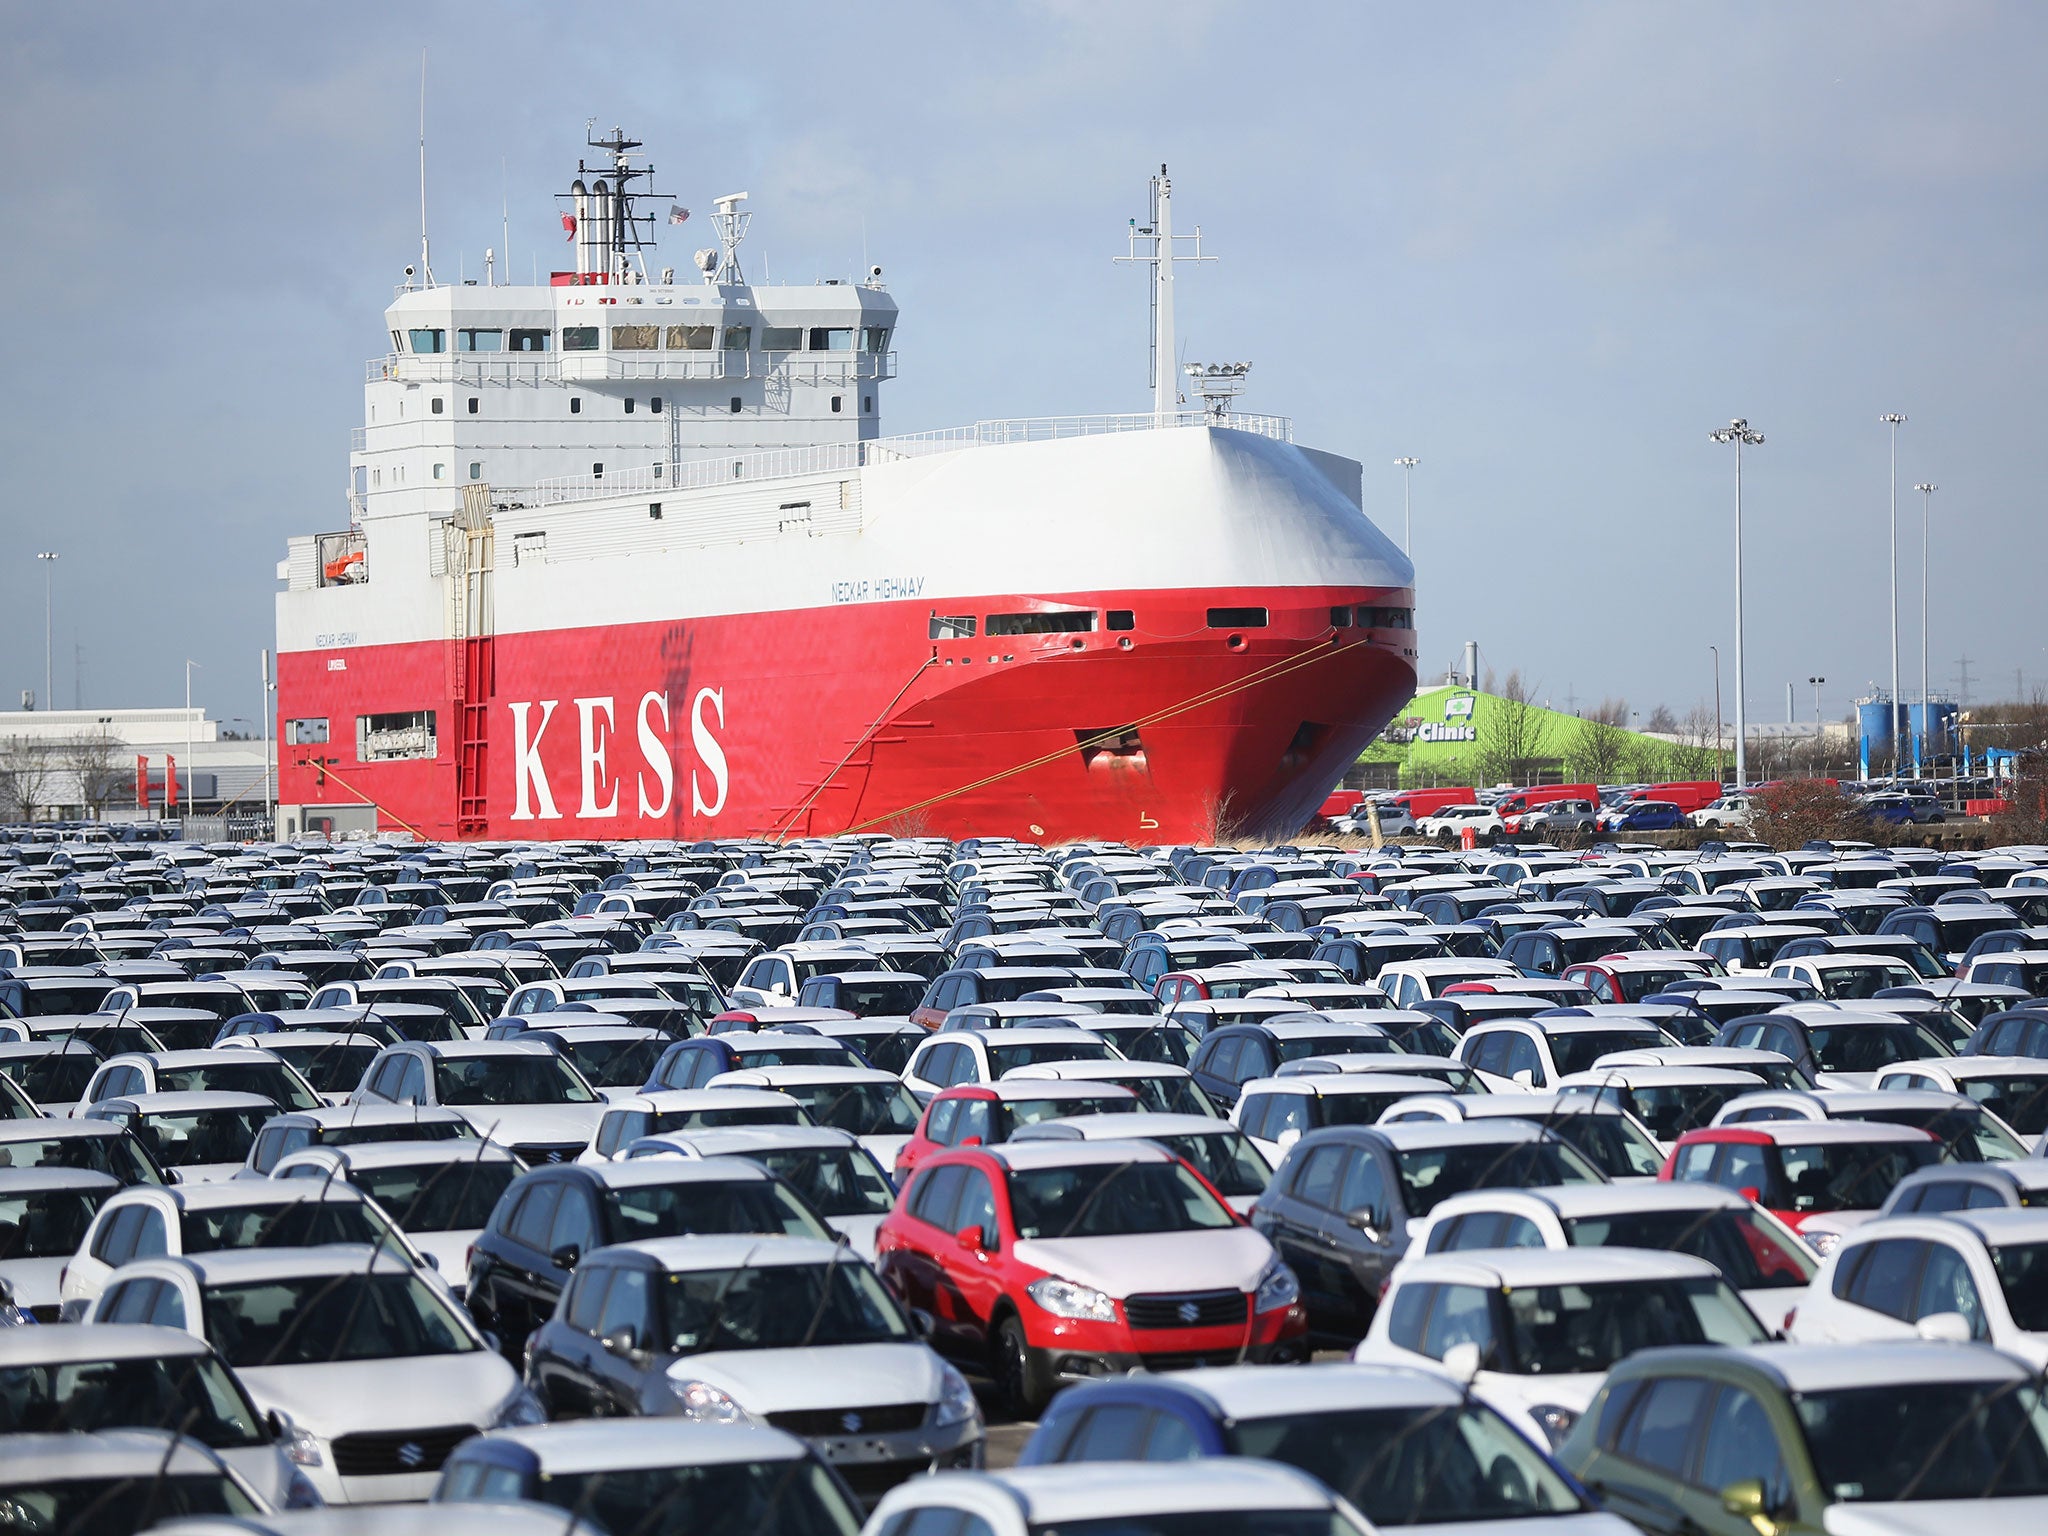 UK car exporters would face a 10 per cent duty if Britain votes to leave the EU